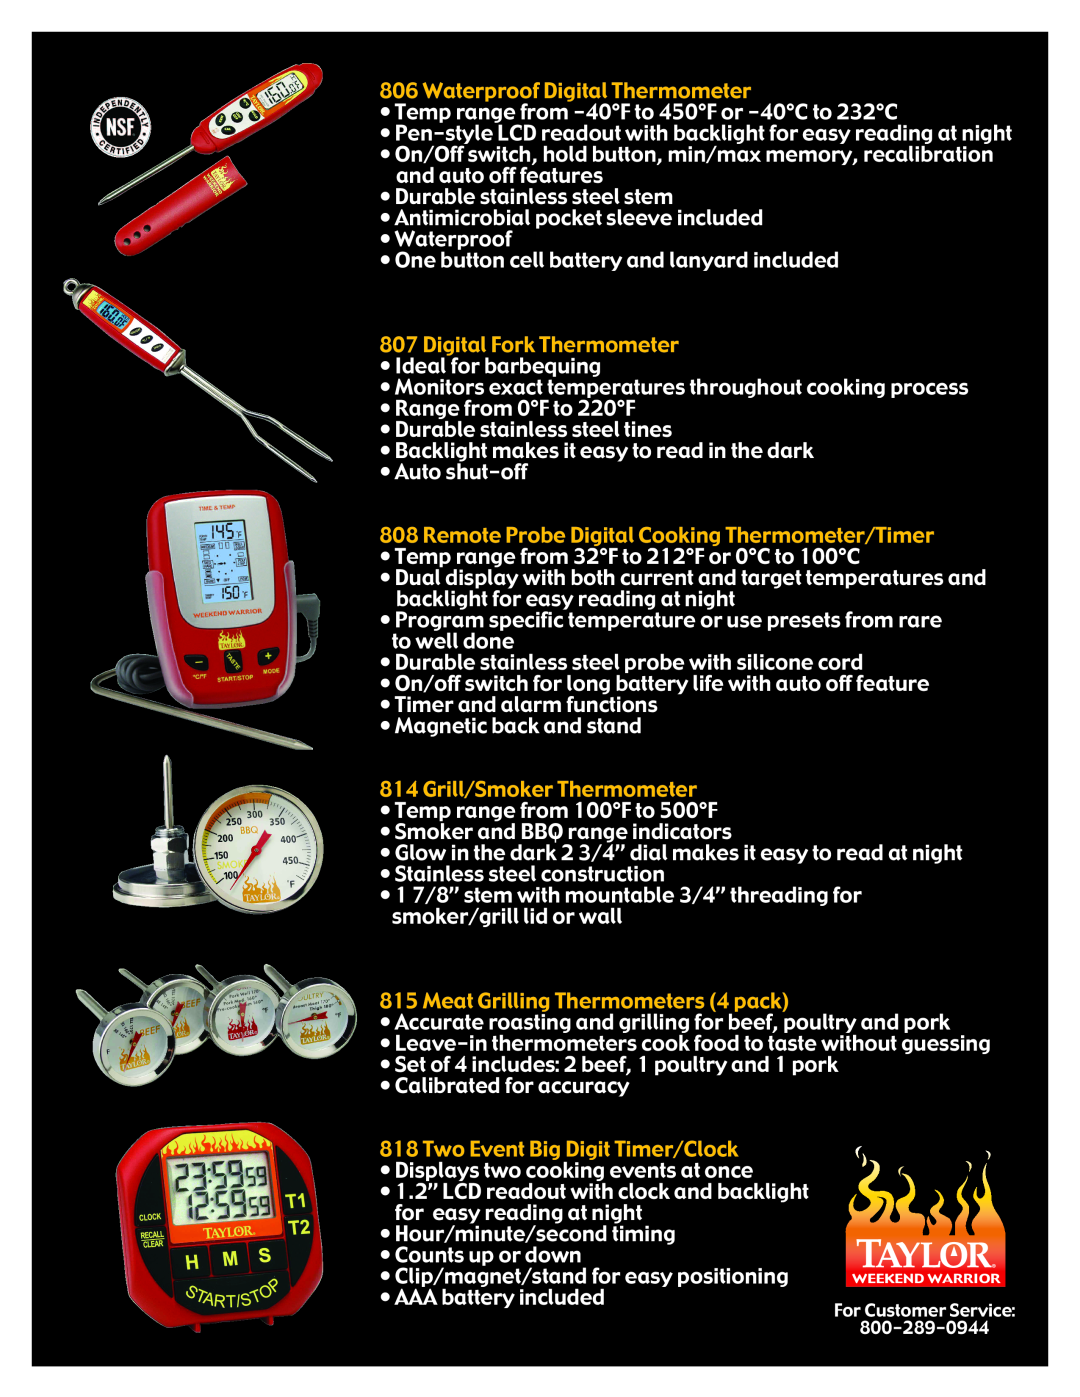 Taylor 808, 805 Waterproof Digital Thermometer, Digital Fork Thermometer, Remote Probe Digital Cooking Thermometer/Timer 